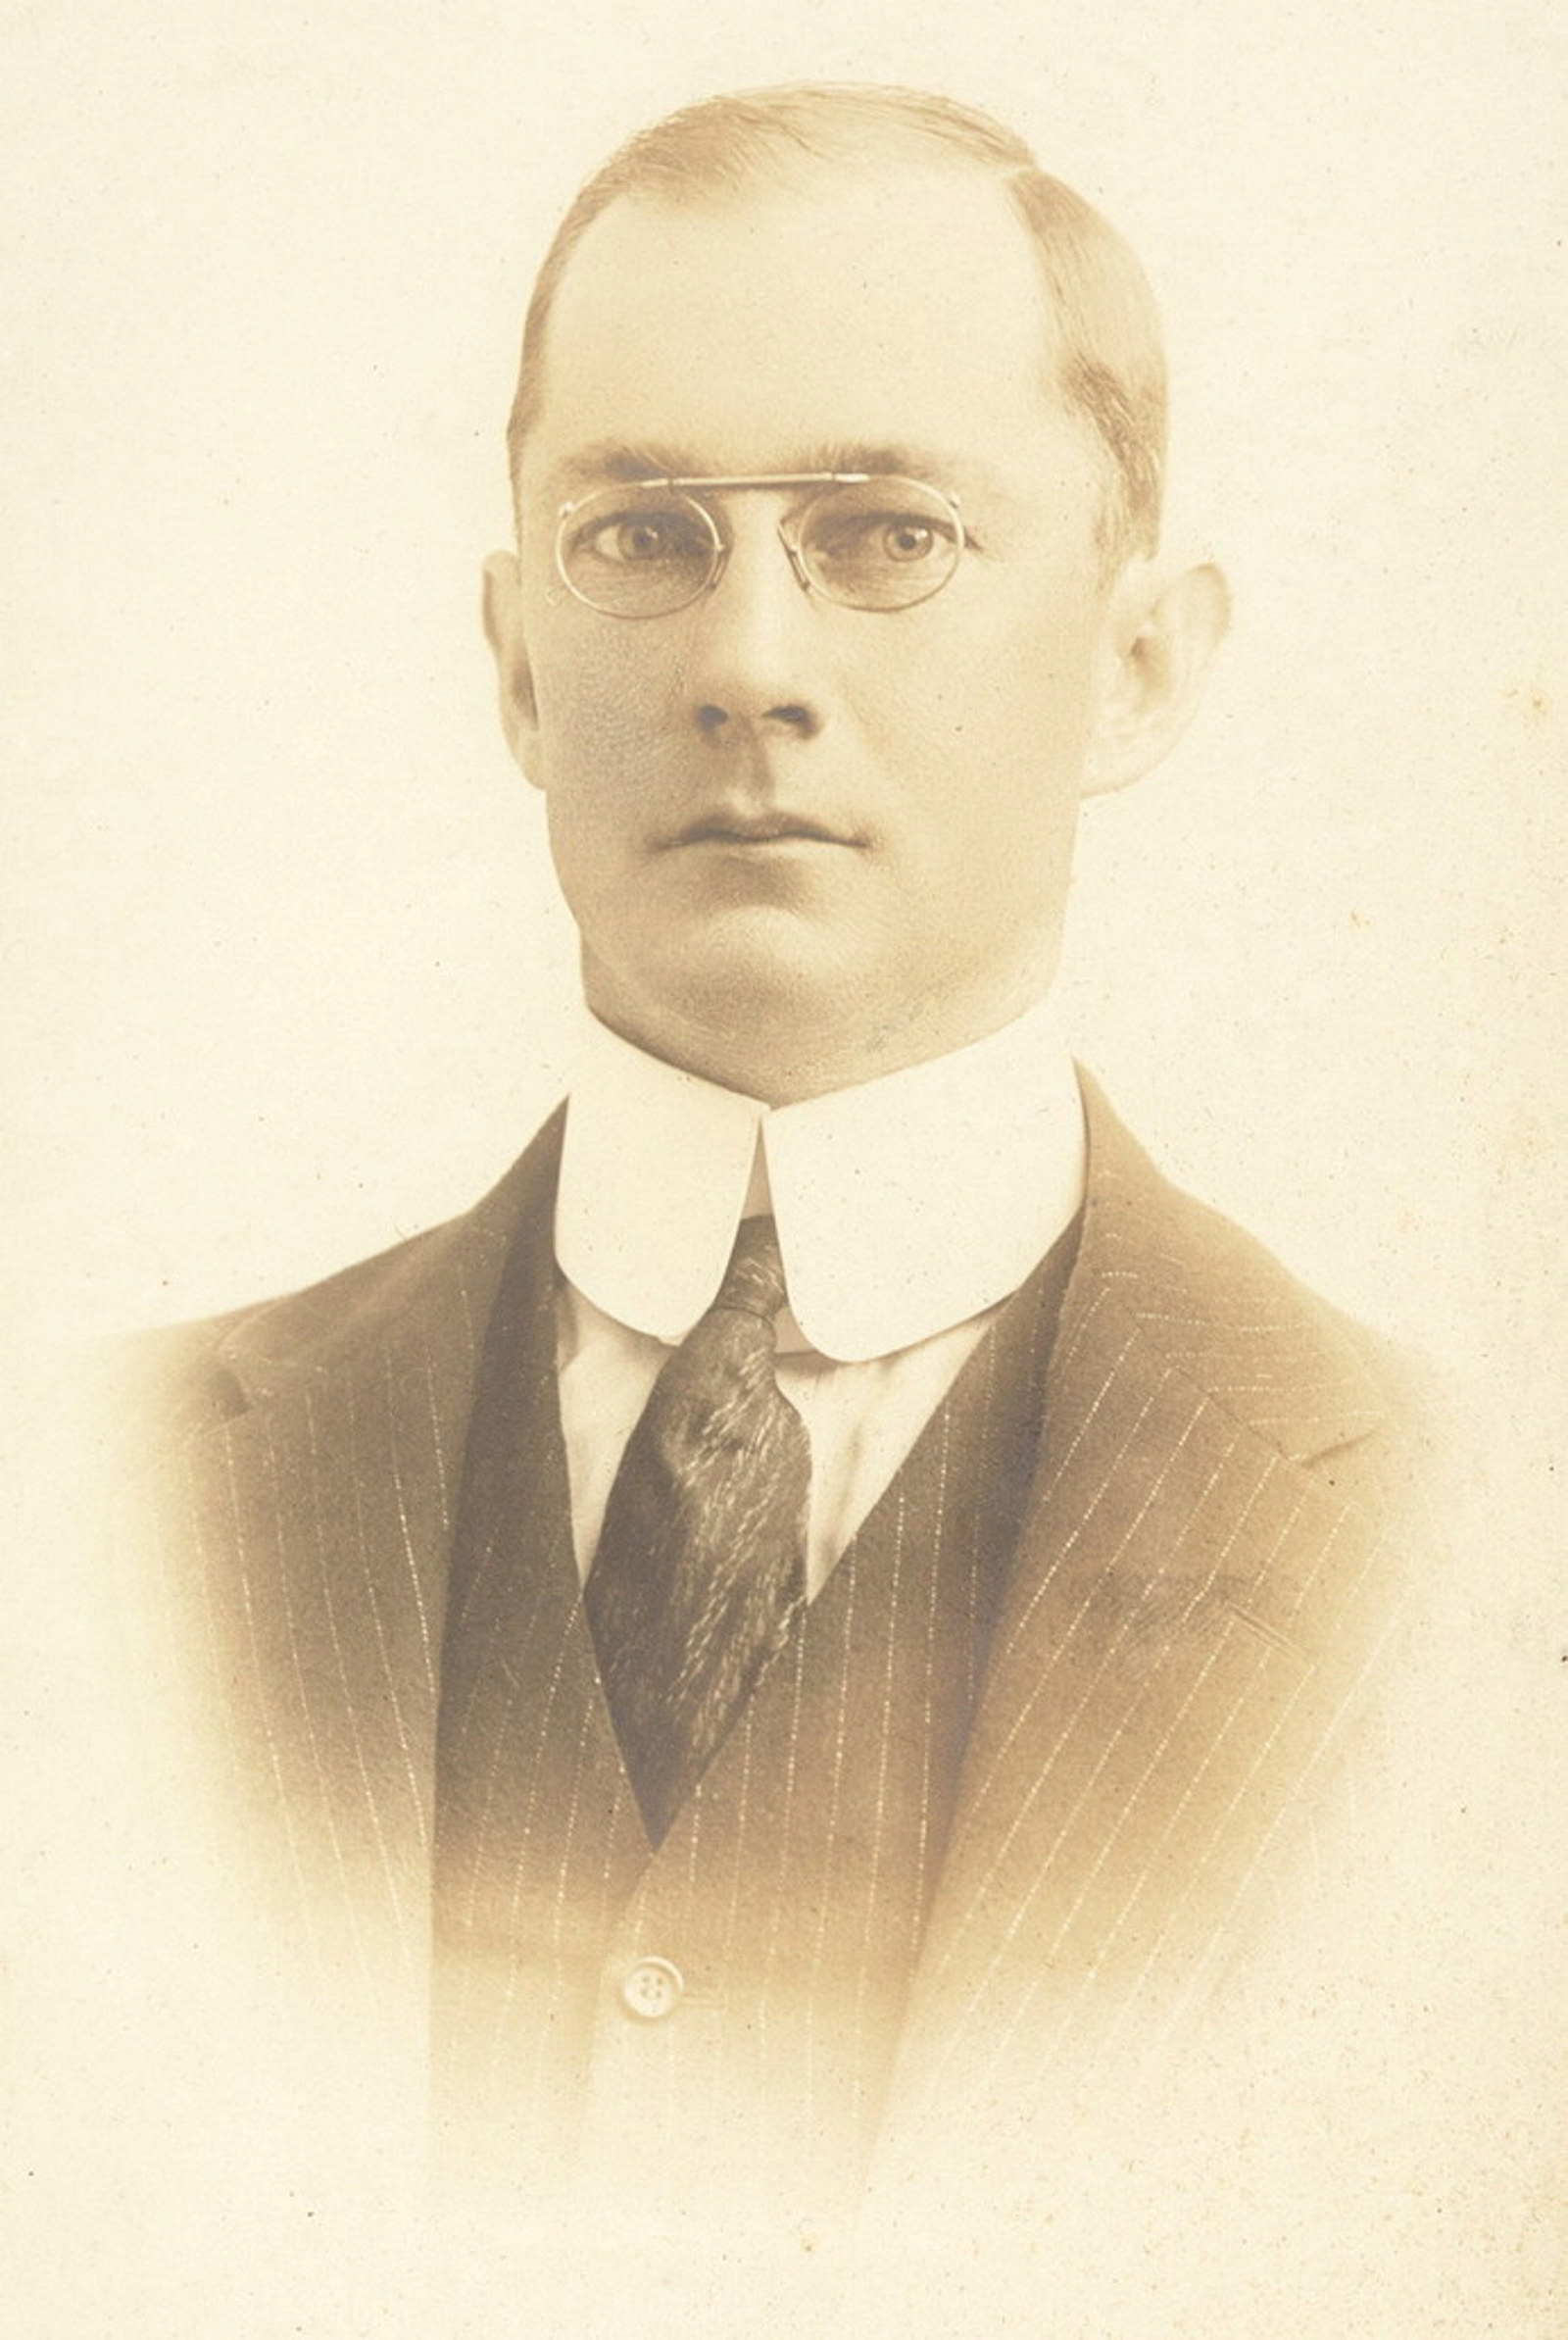 Sepia toned photo of man wearing glasses with a coat, high collar and tie.